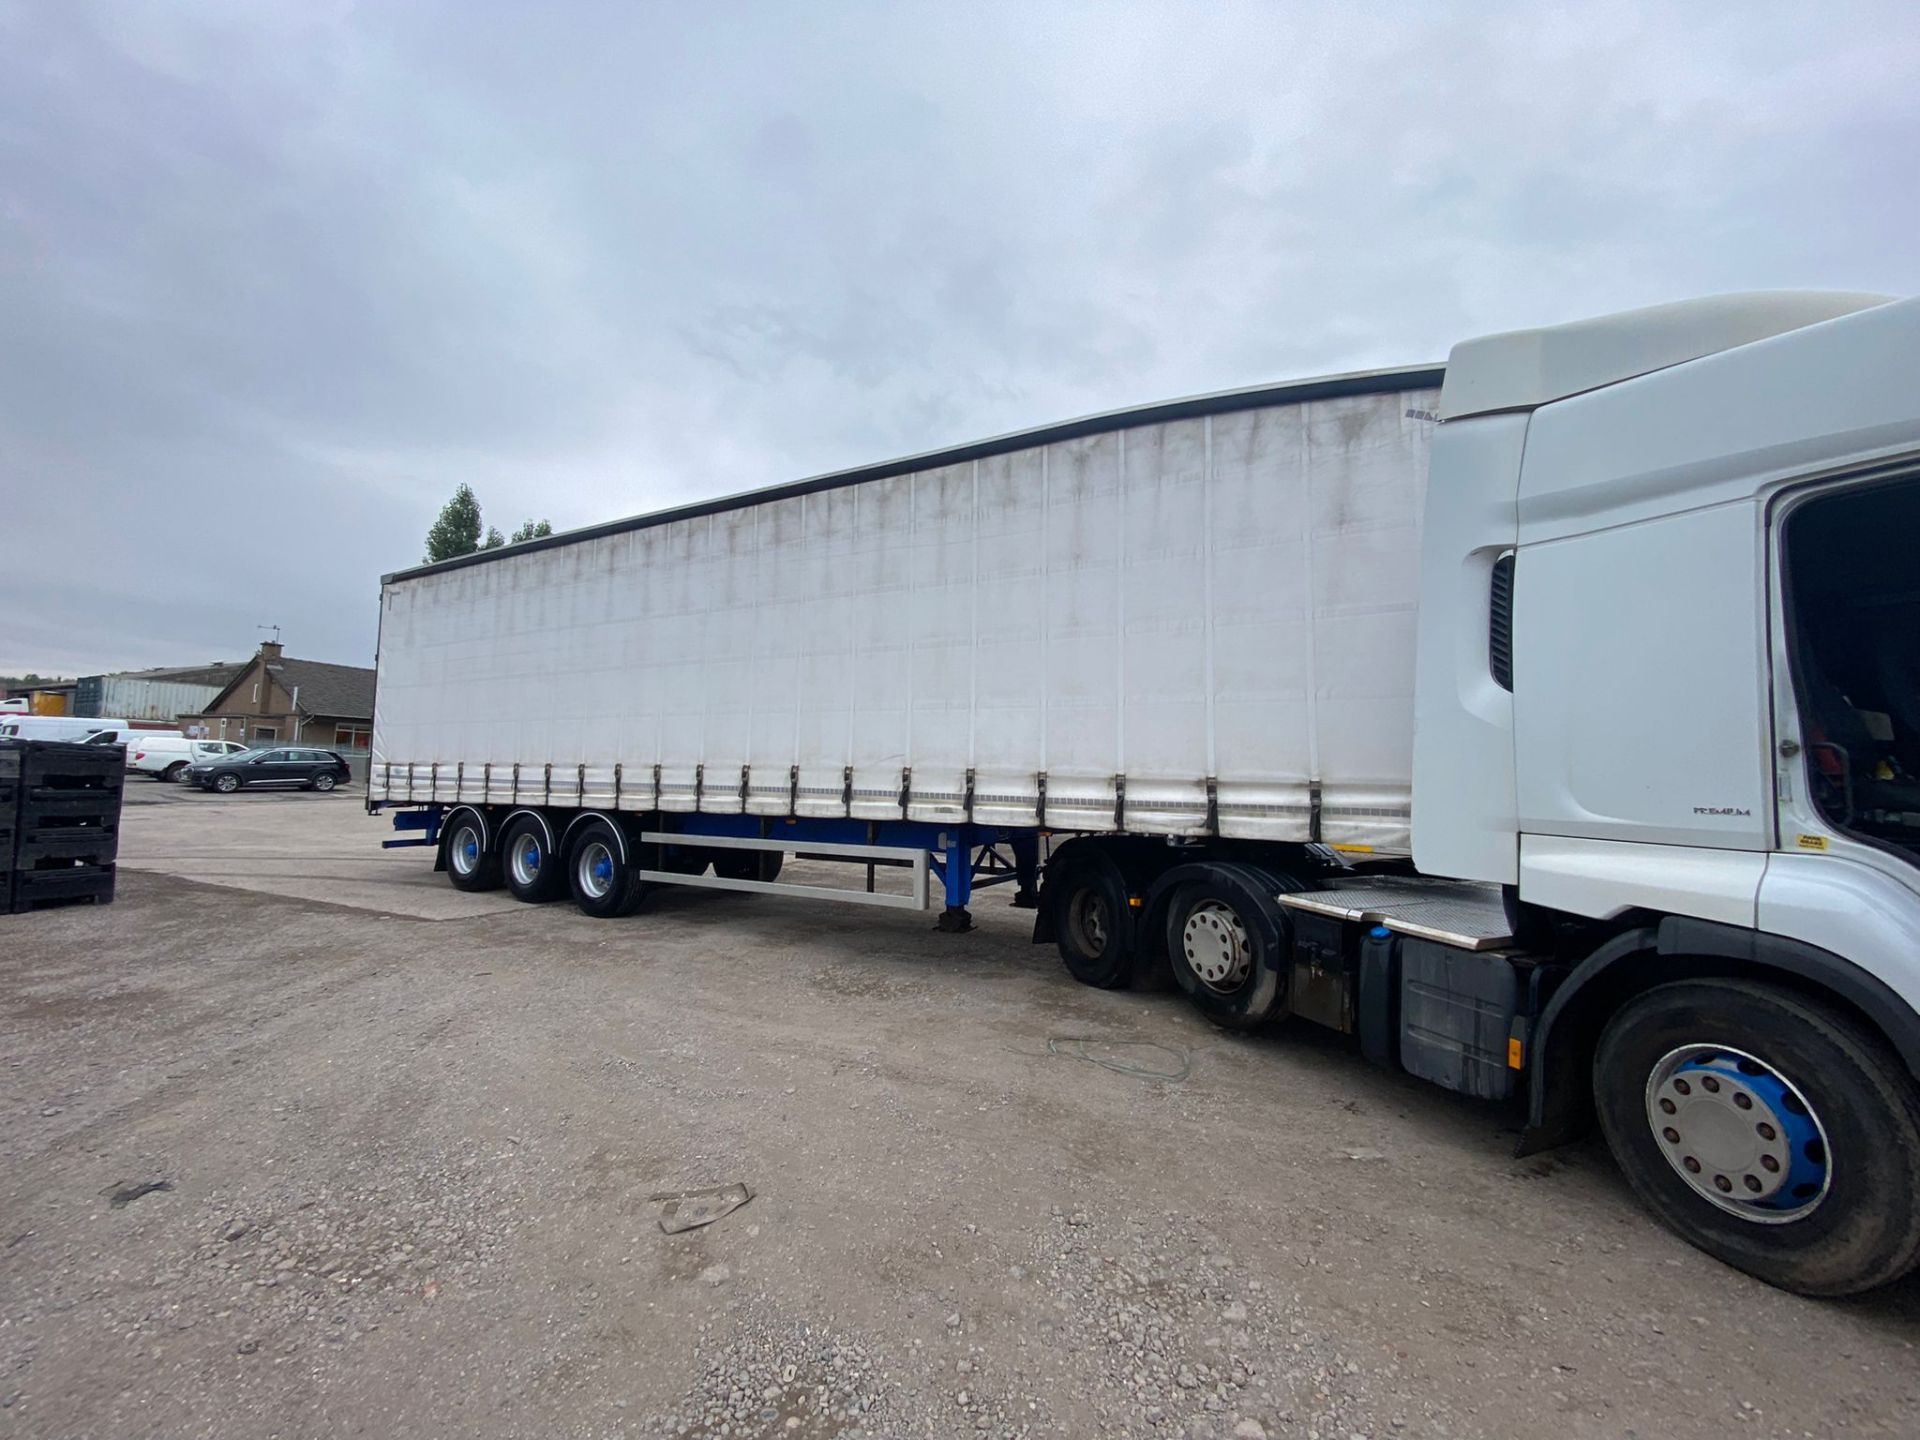 2016 MODEL LAWRENCE DAVID XL CURTAIN SIDE TRAILER - 4.4 METRES HIGH - Image 4 of 6